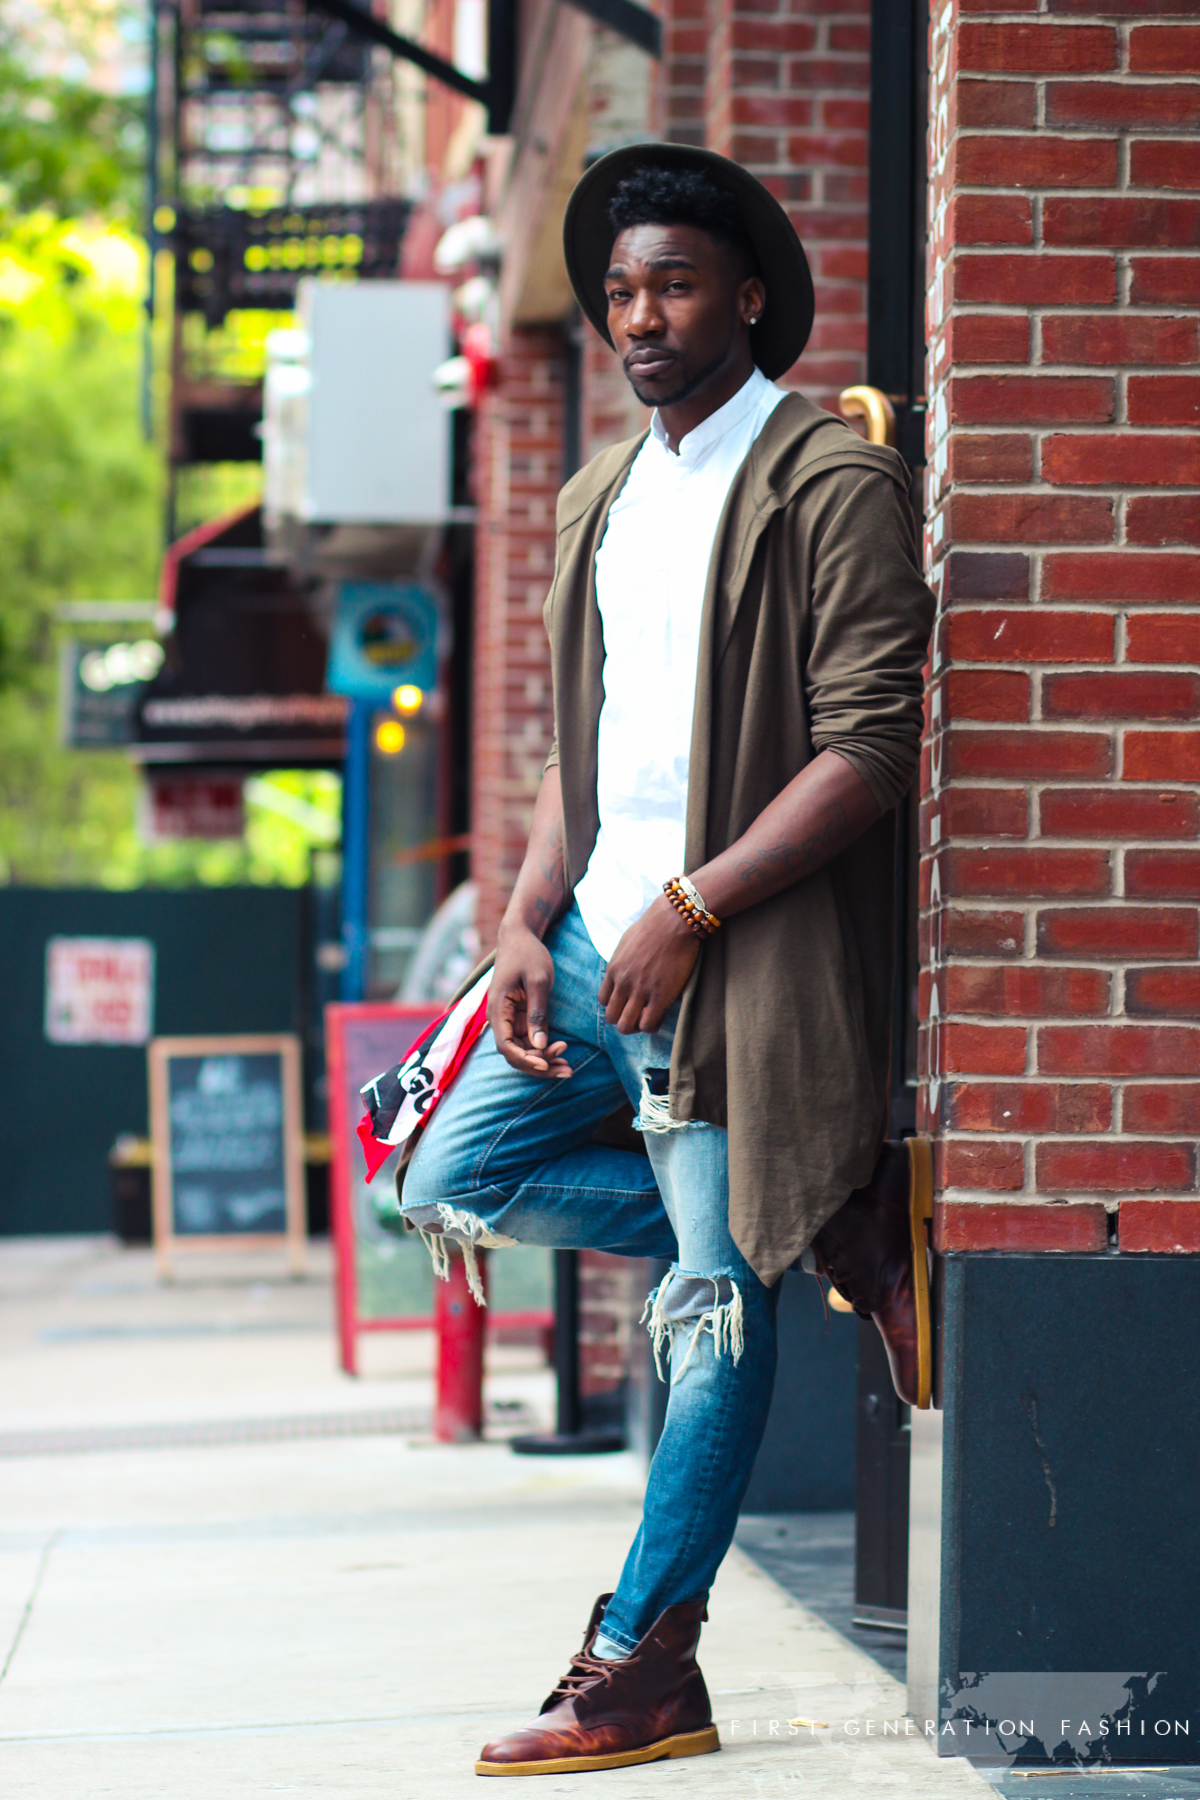 Jordan: From Trinidad to the Lower East Side - First Generation Fashion